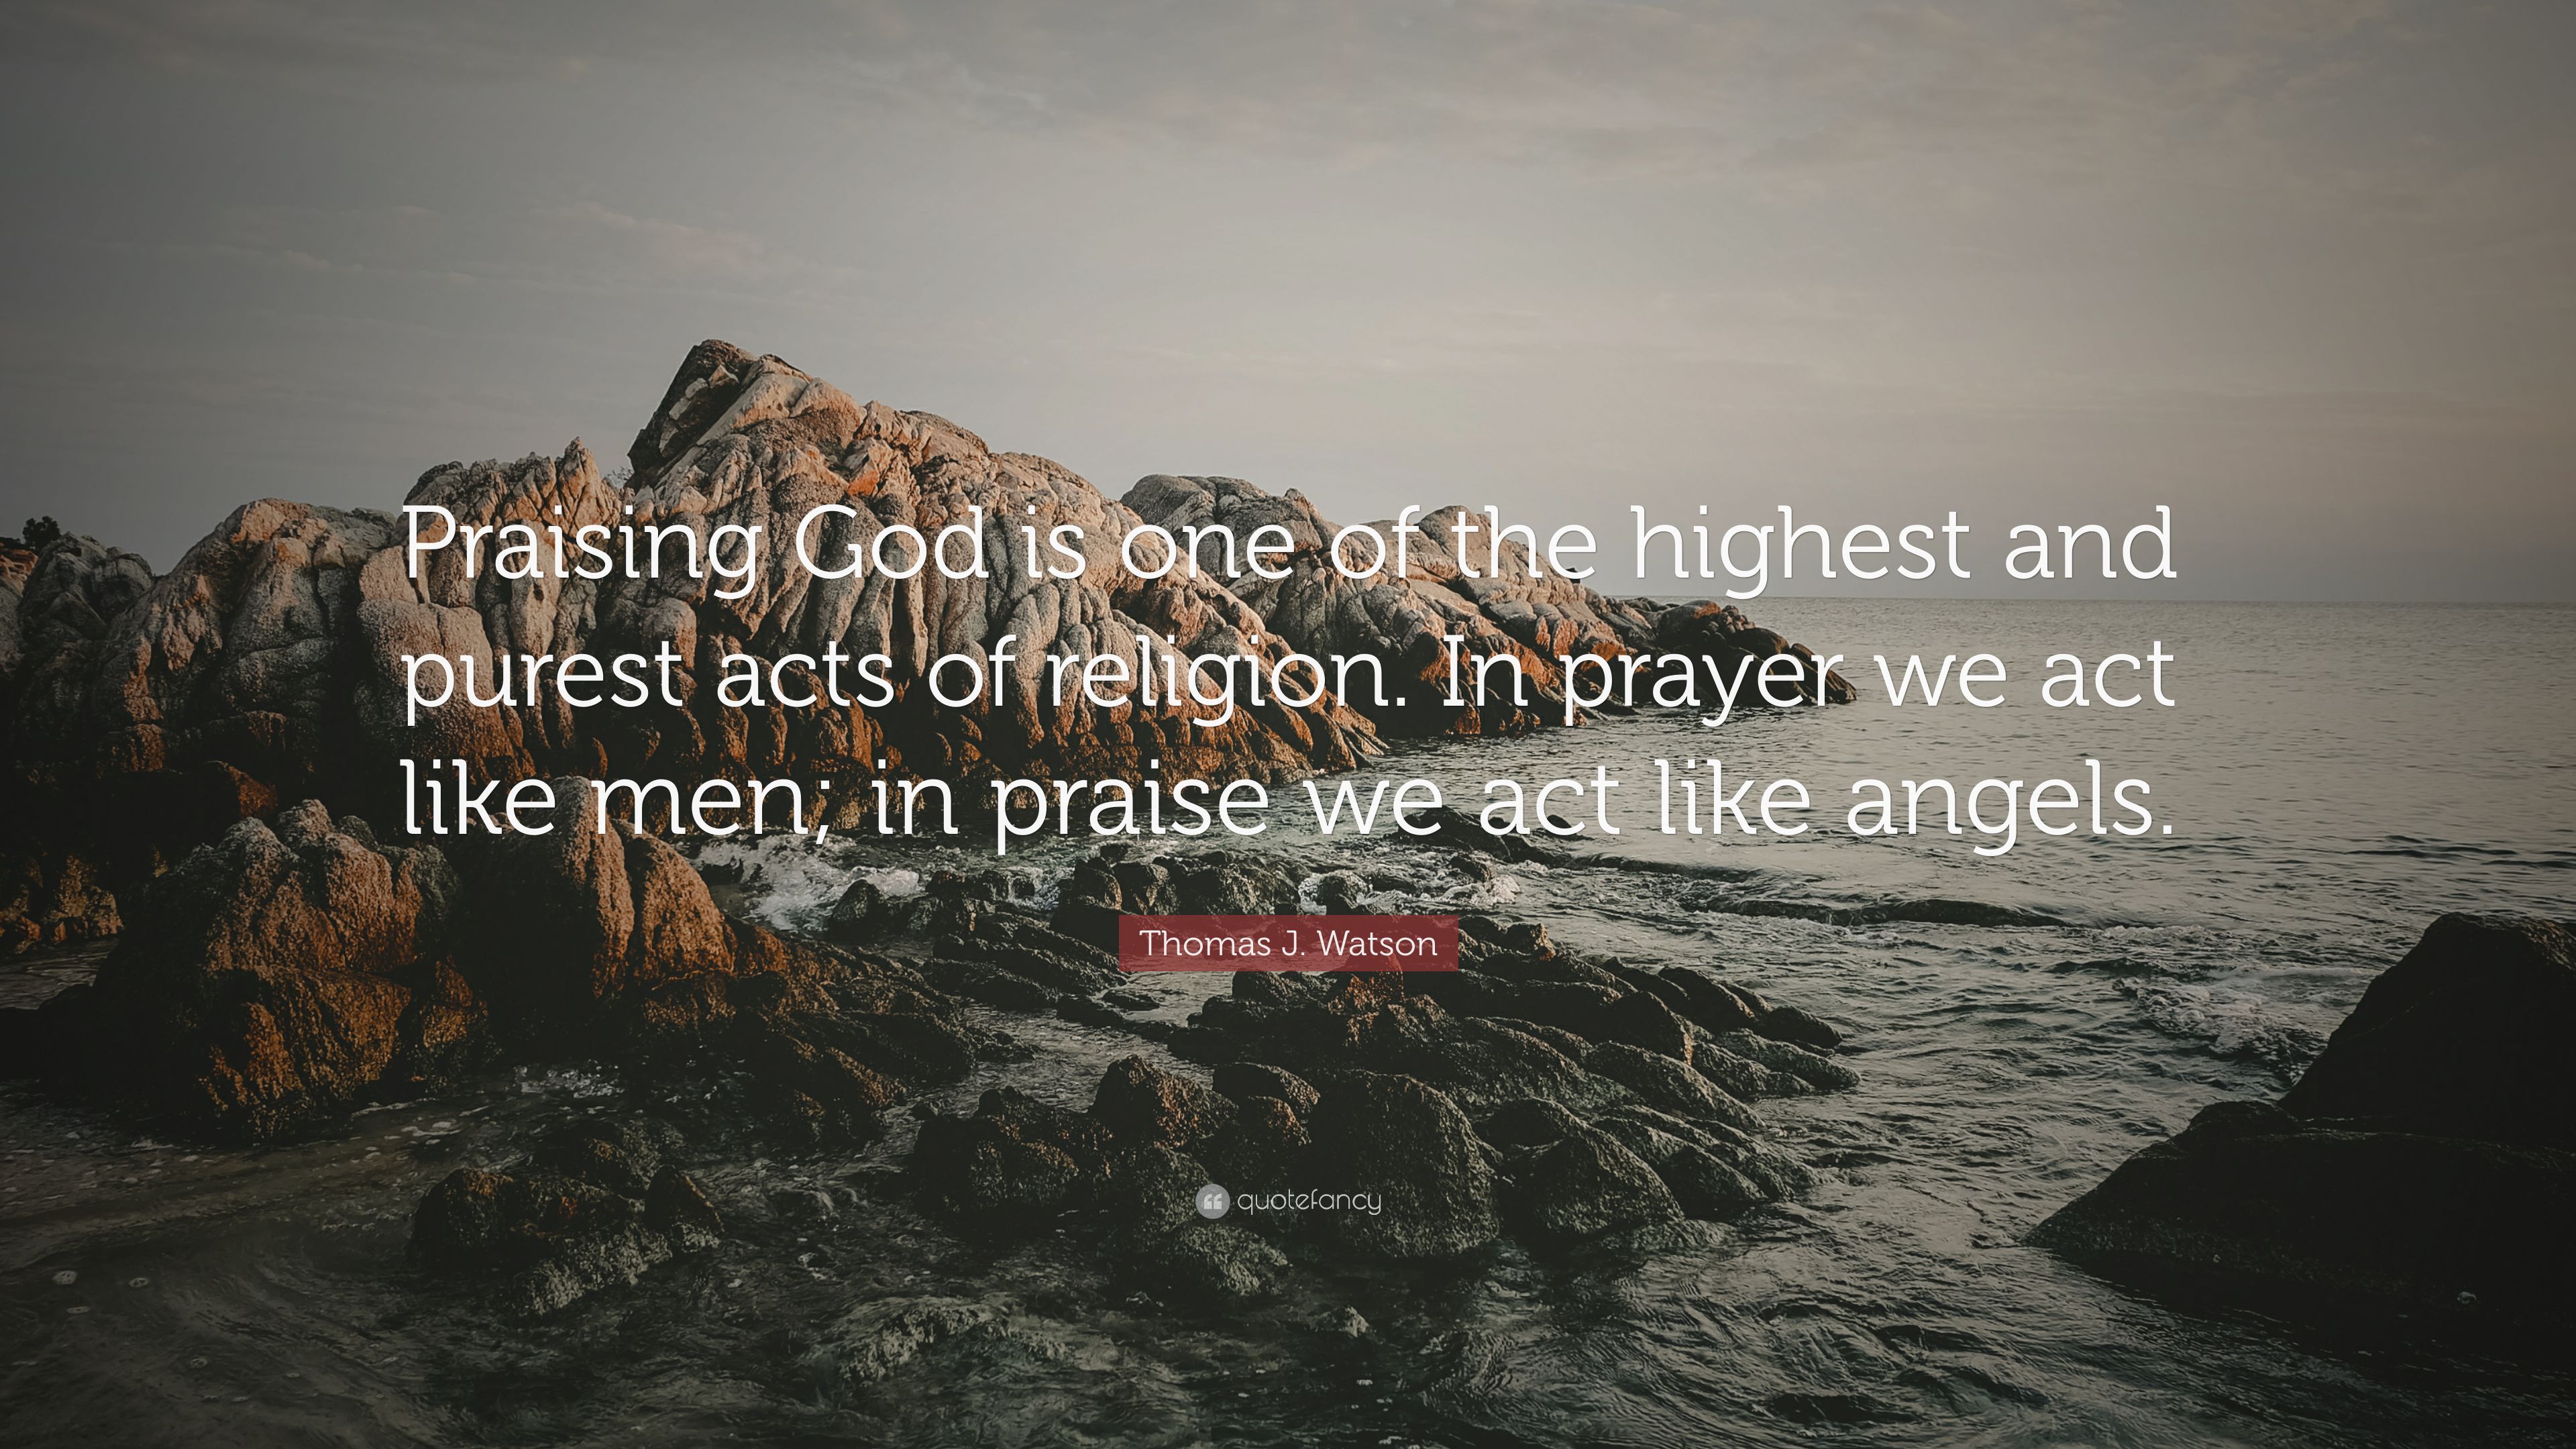 Thomas J. Watson Quote: “Praising God is one of the highest